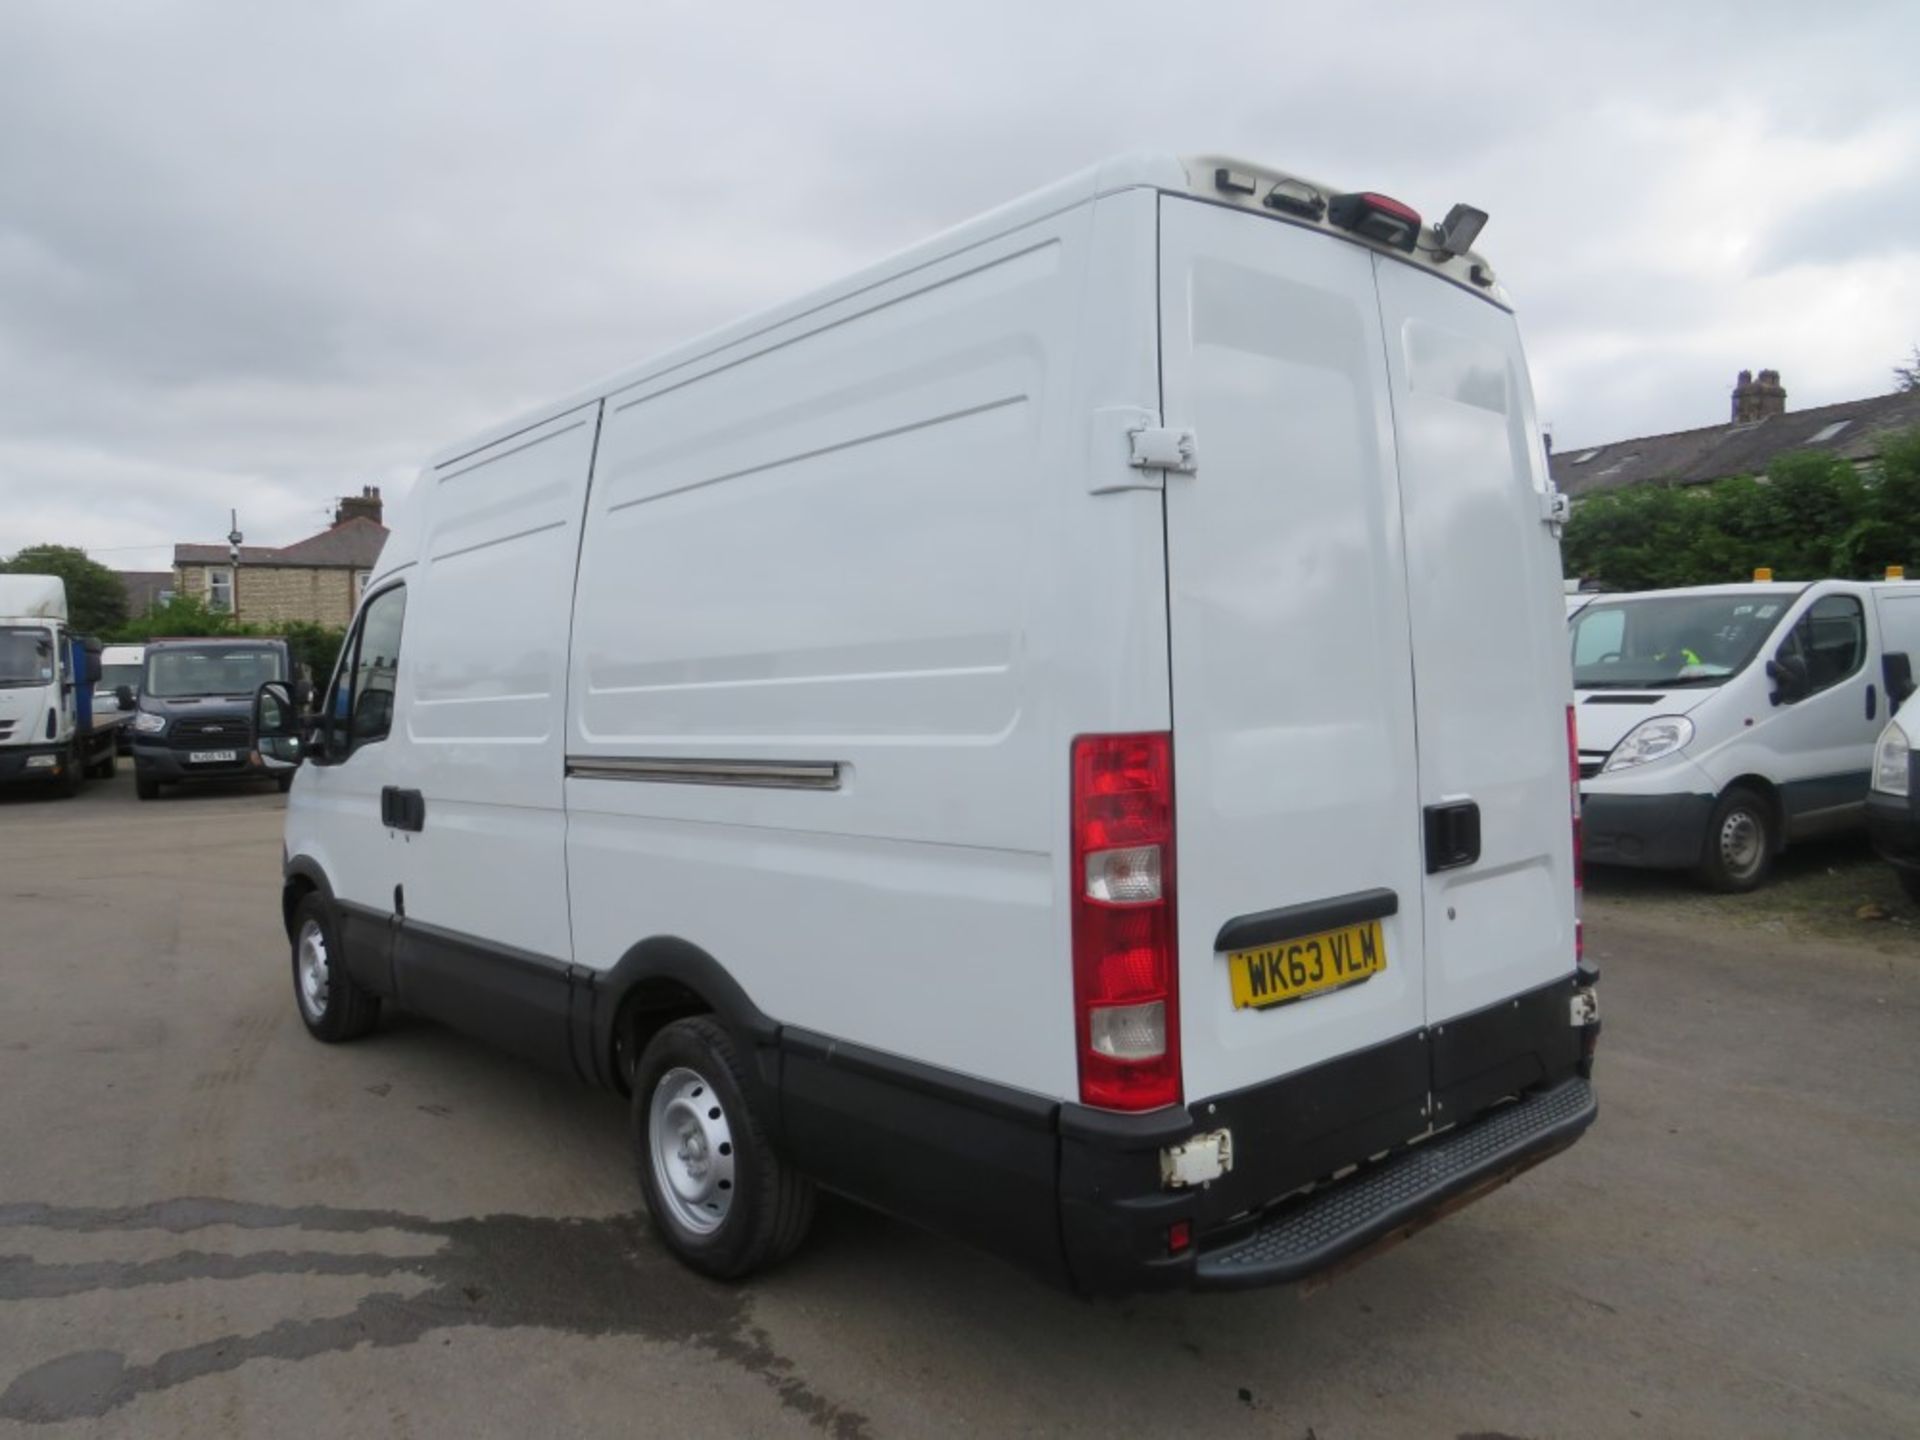 63 reg IVECO DAILY 35C13 AUTOMATIC SPECIALLY FITTED VAN, 1ST REG 10/13, TEST 10/21, 201545M - Image 3 of 8